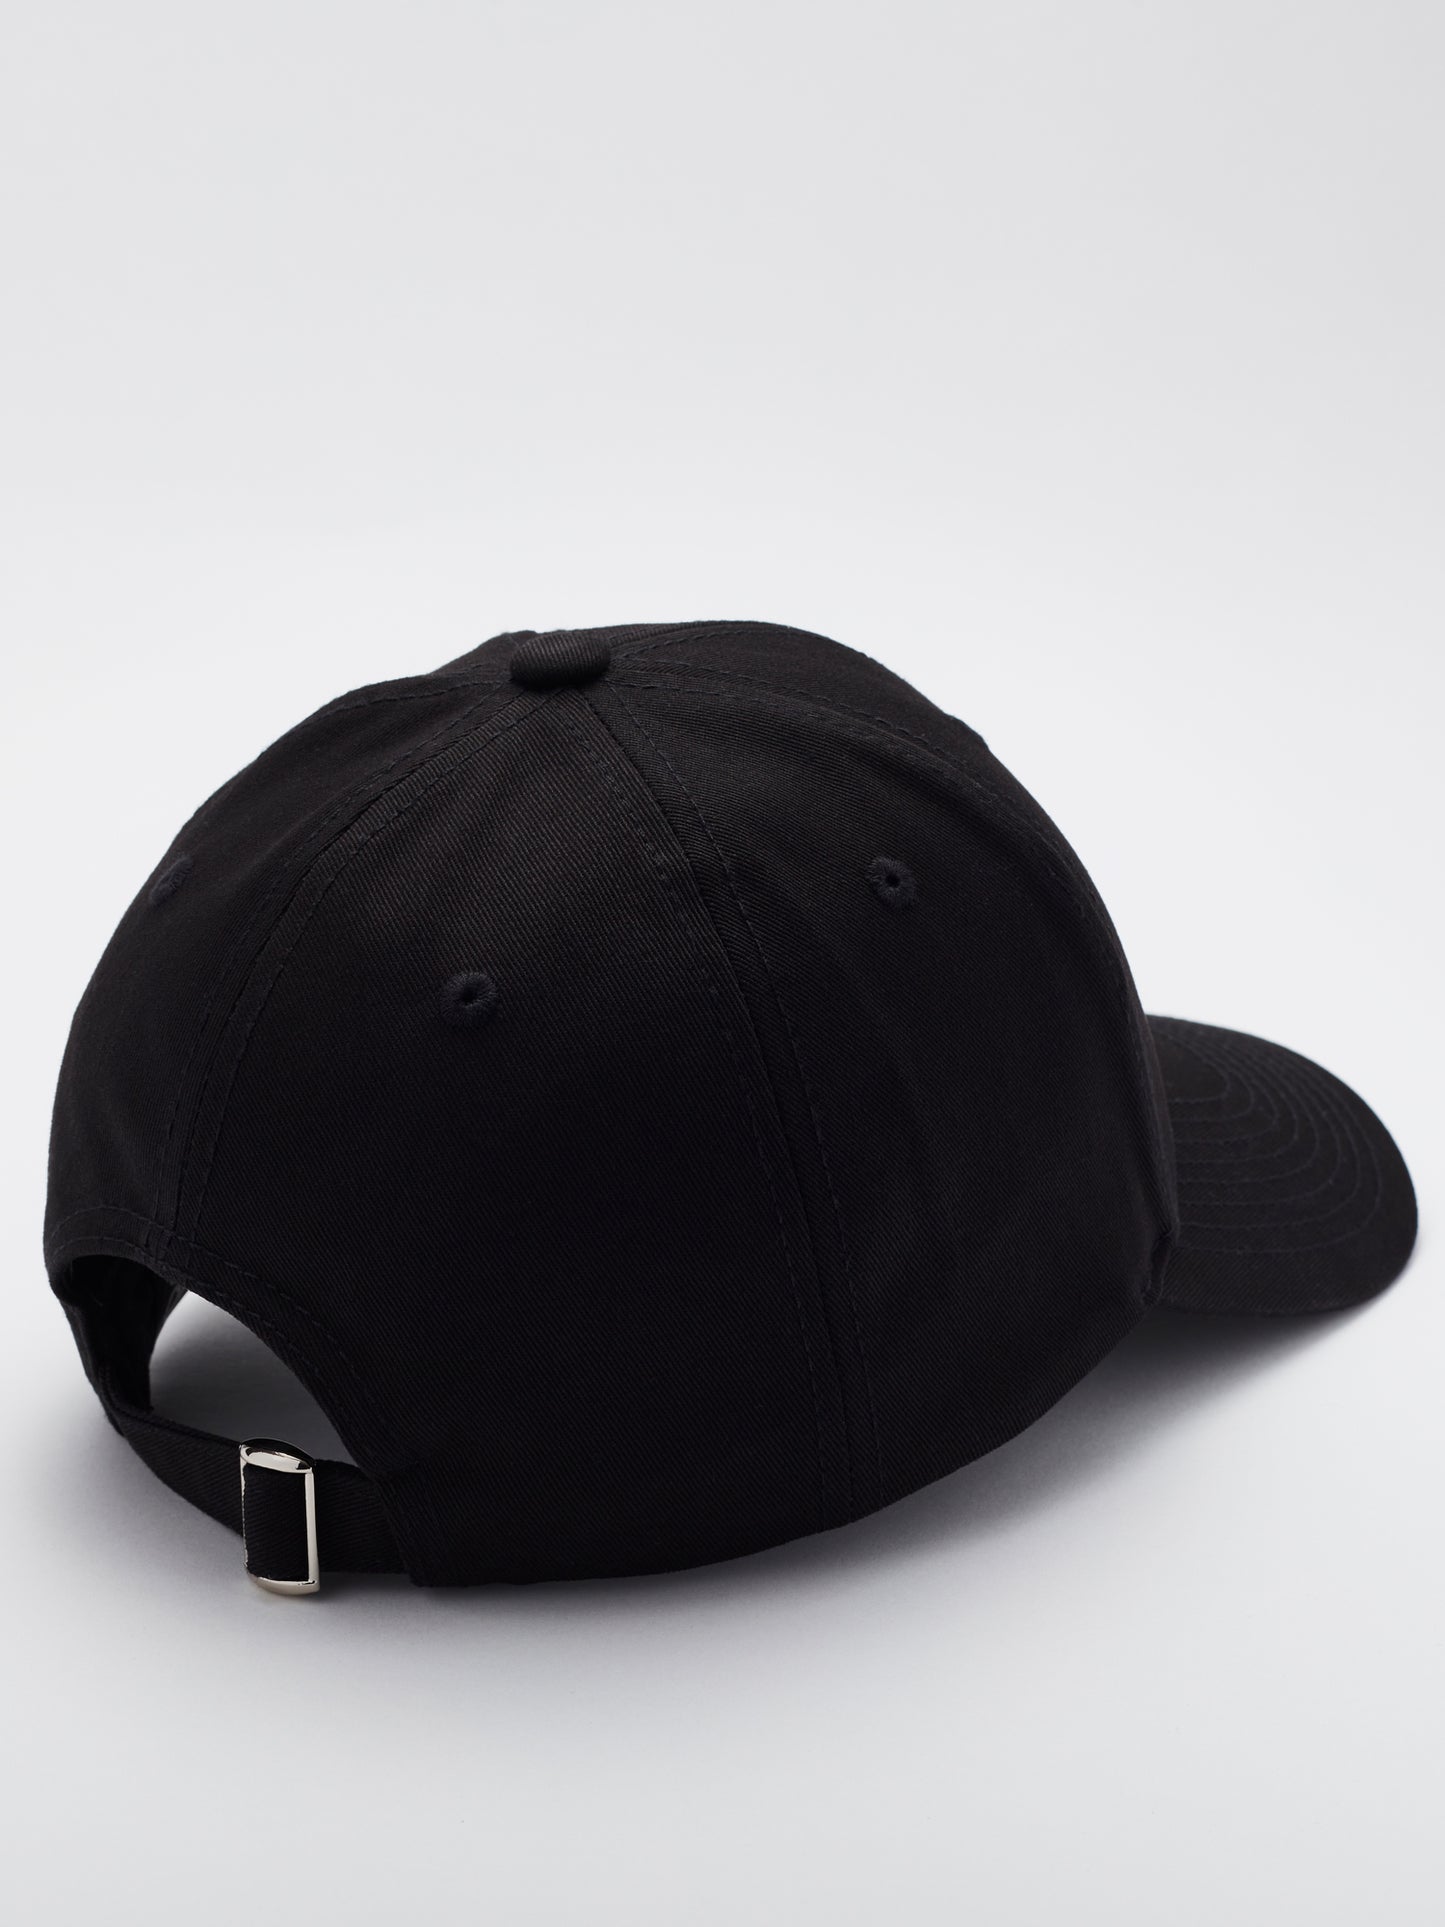 MOOD Brand - Flying Ghost Baseball Cap in Space Black Color - Back view